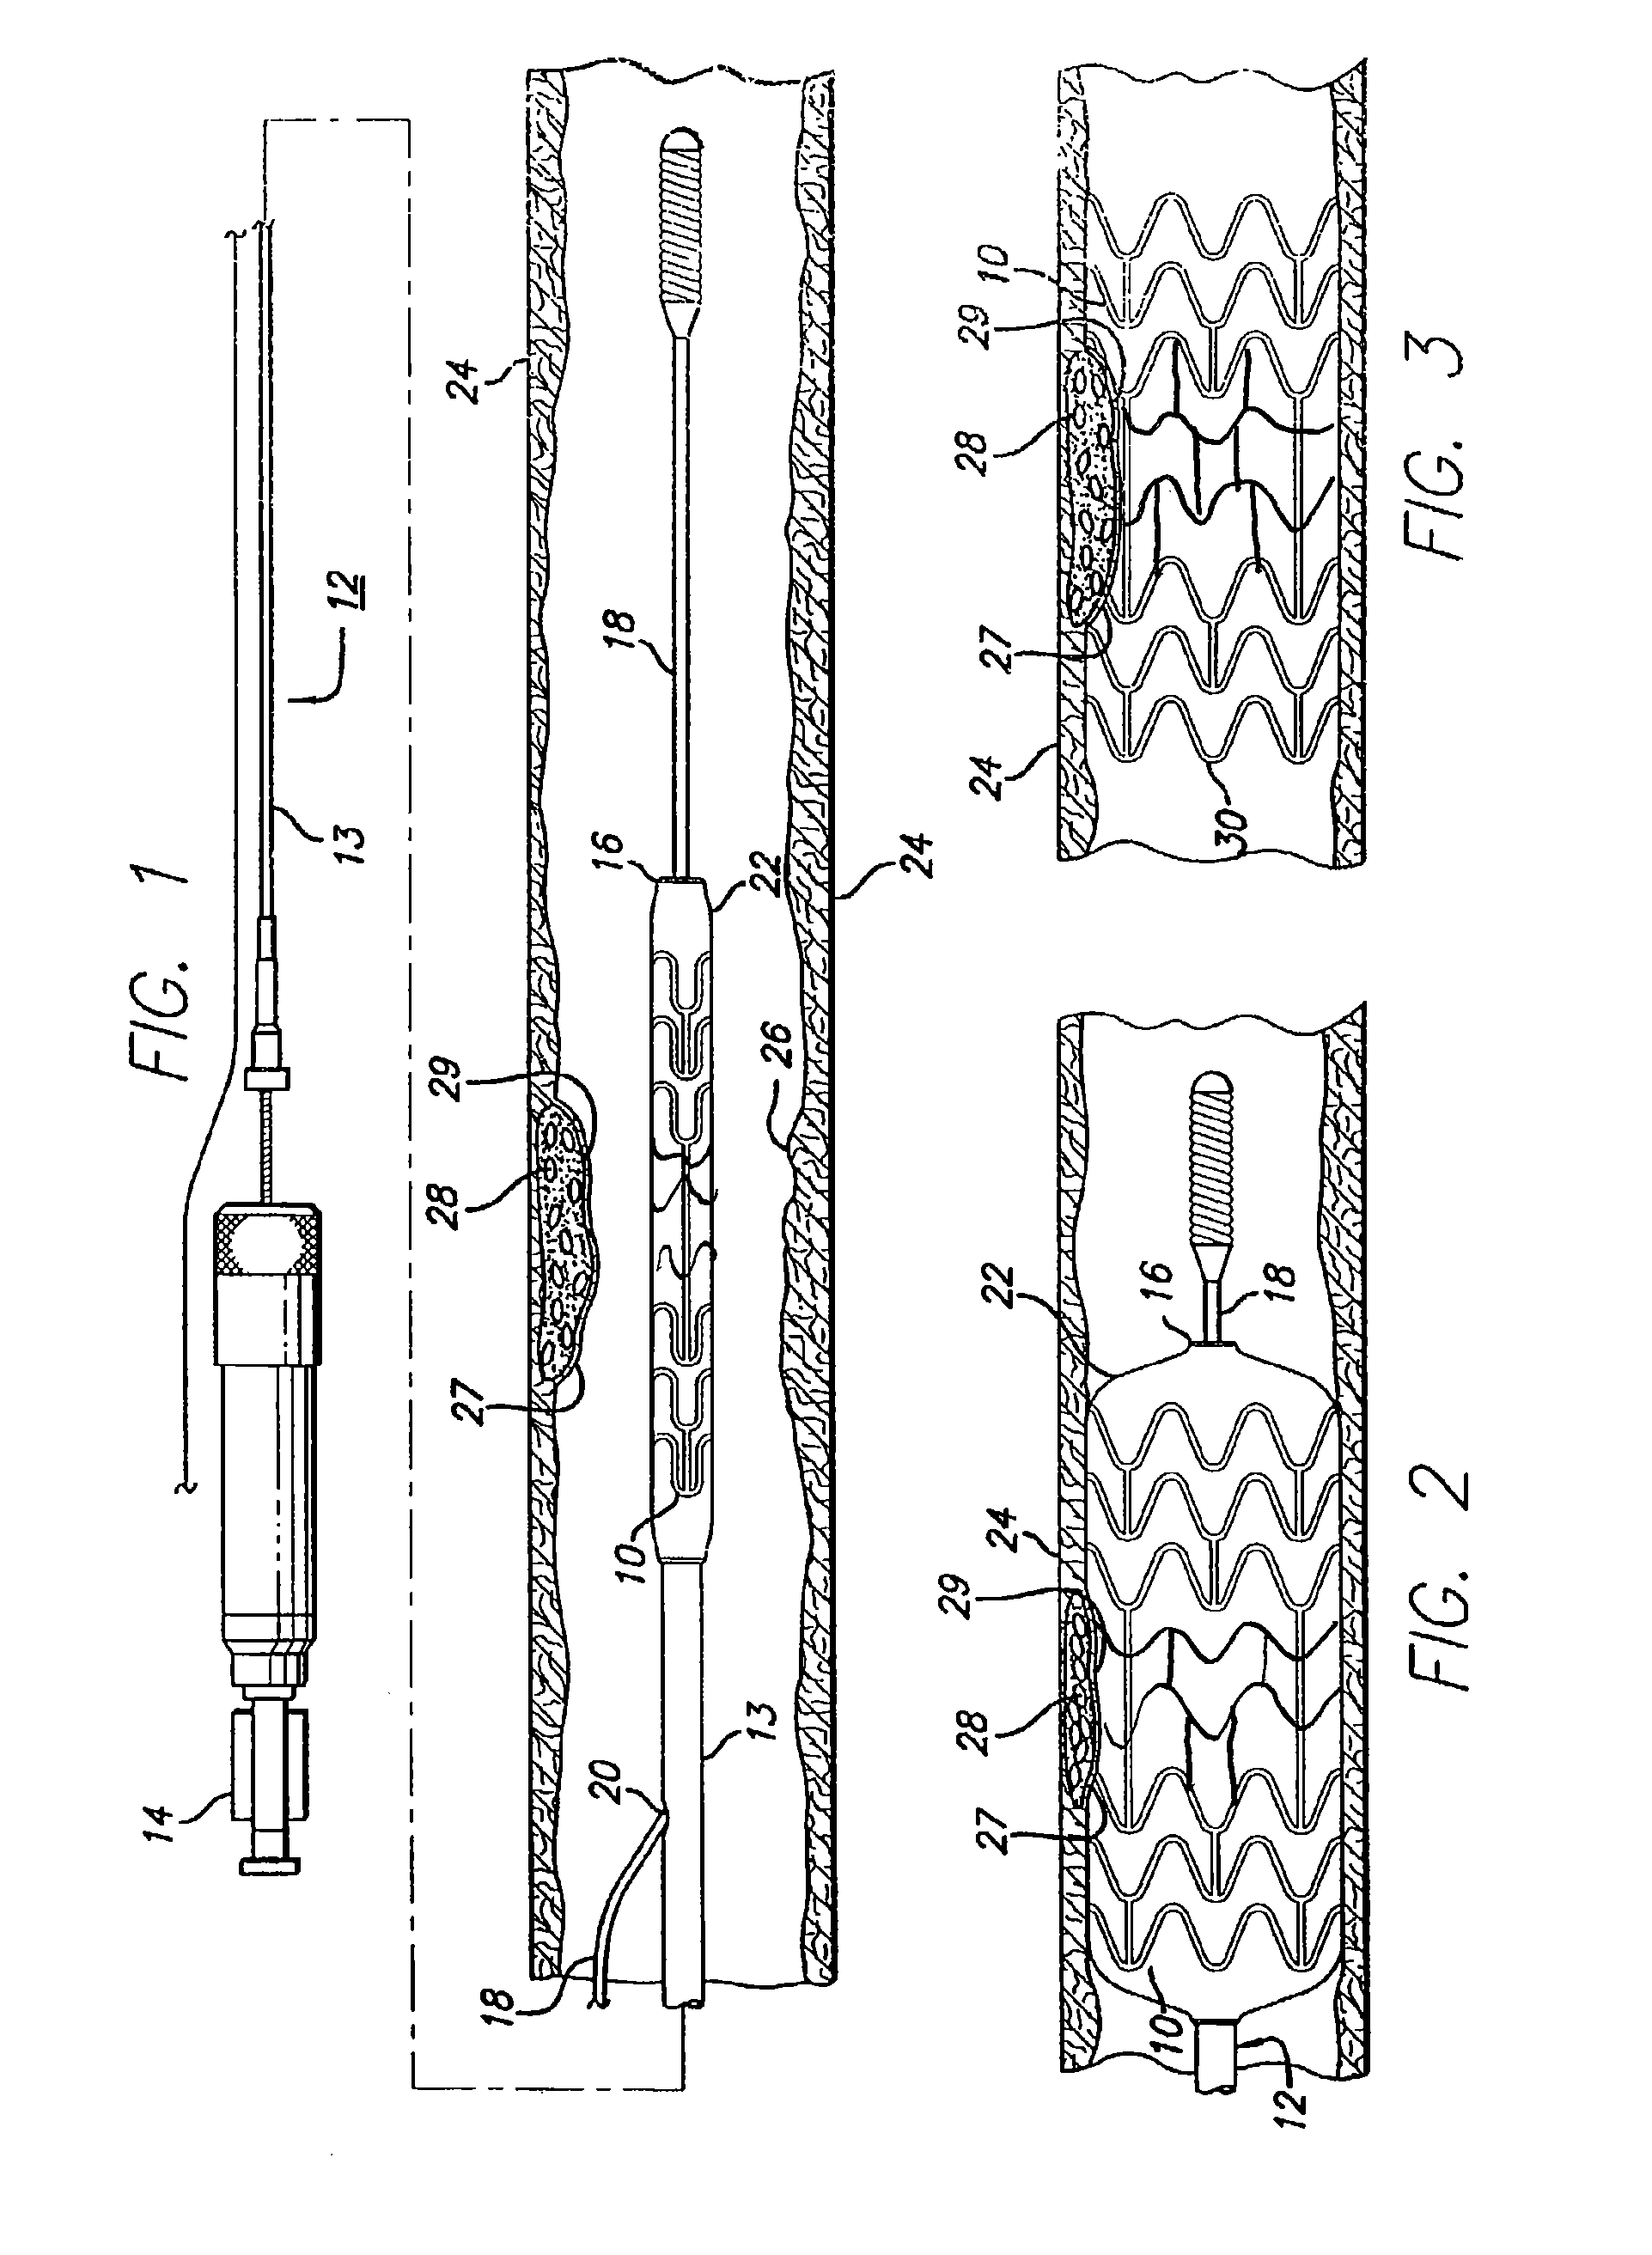 Medical device of ternary alloy of molybdenum and rhenium